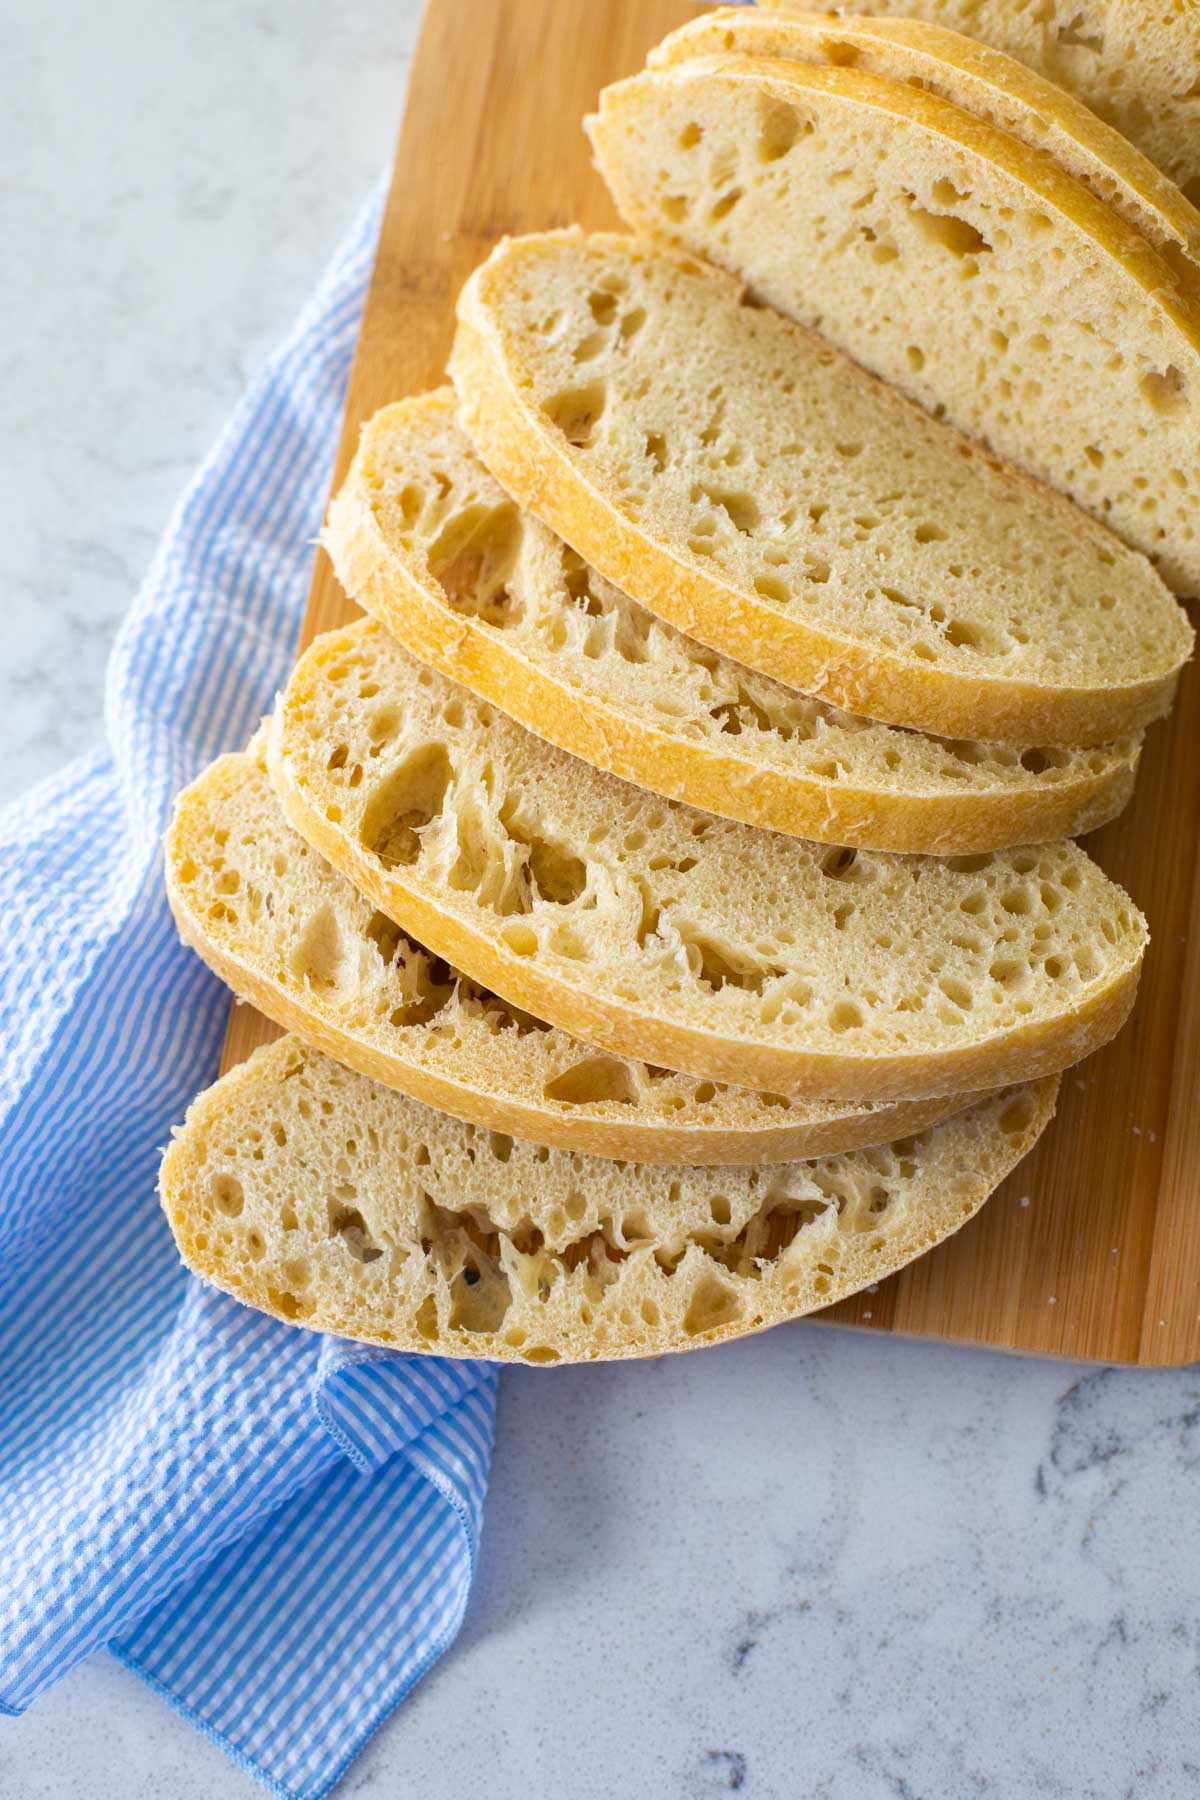 A sliced loaf of fresh ciabatta bread has been prepared in the bread machine and baked in the oven.